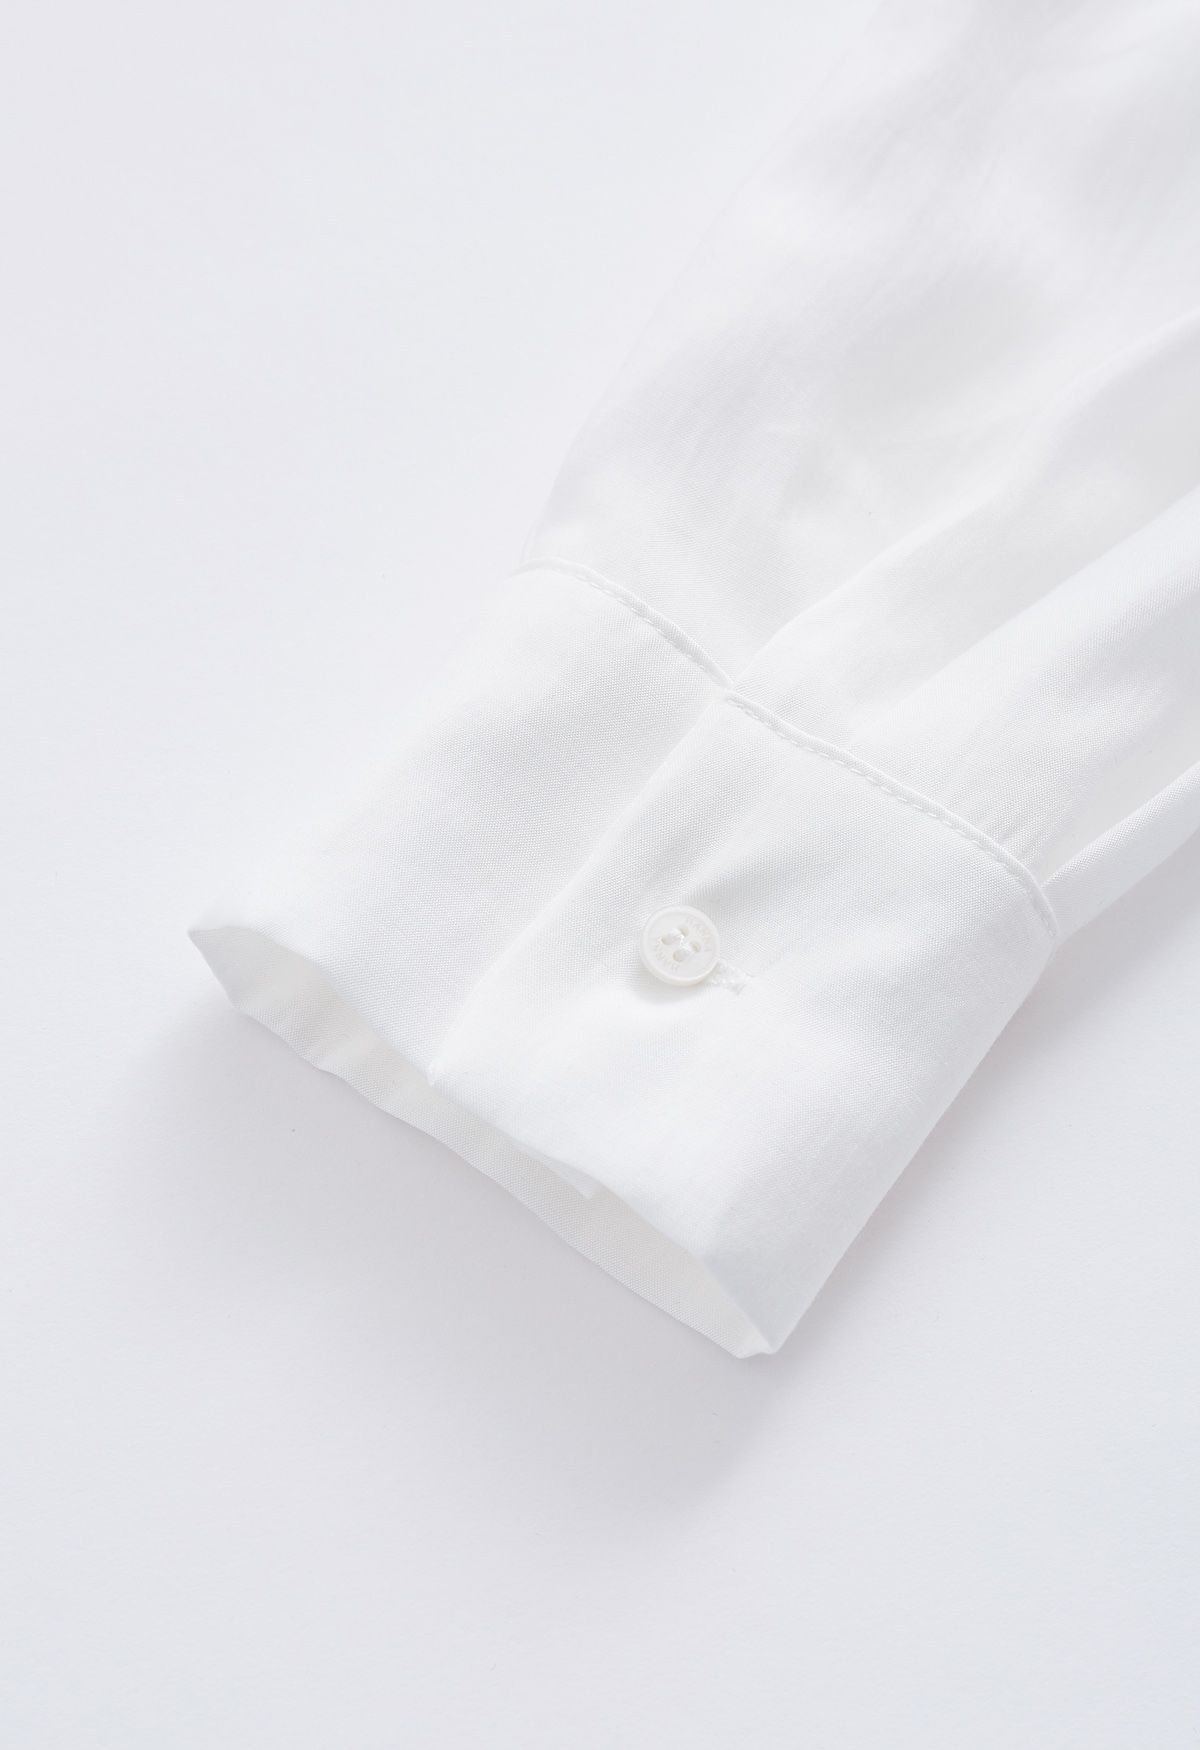 Side Vent Button Down Ruffle Shirt in White